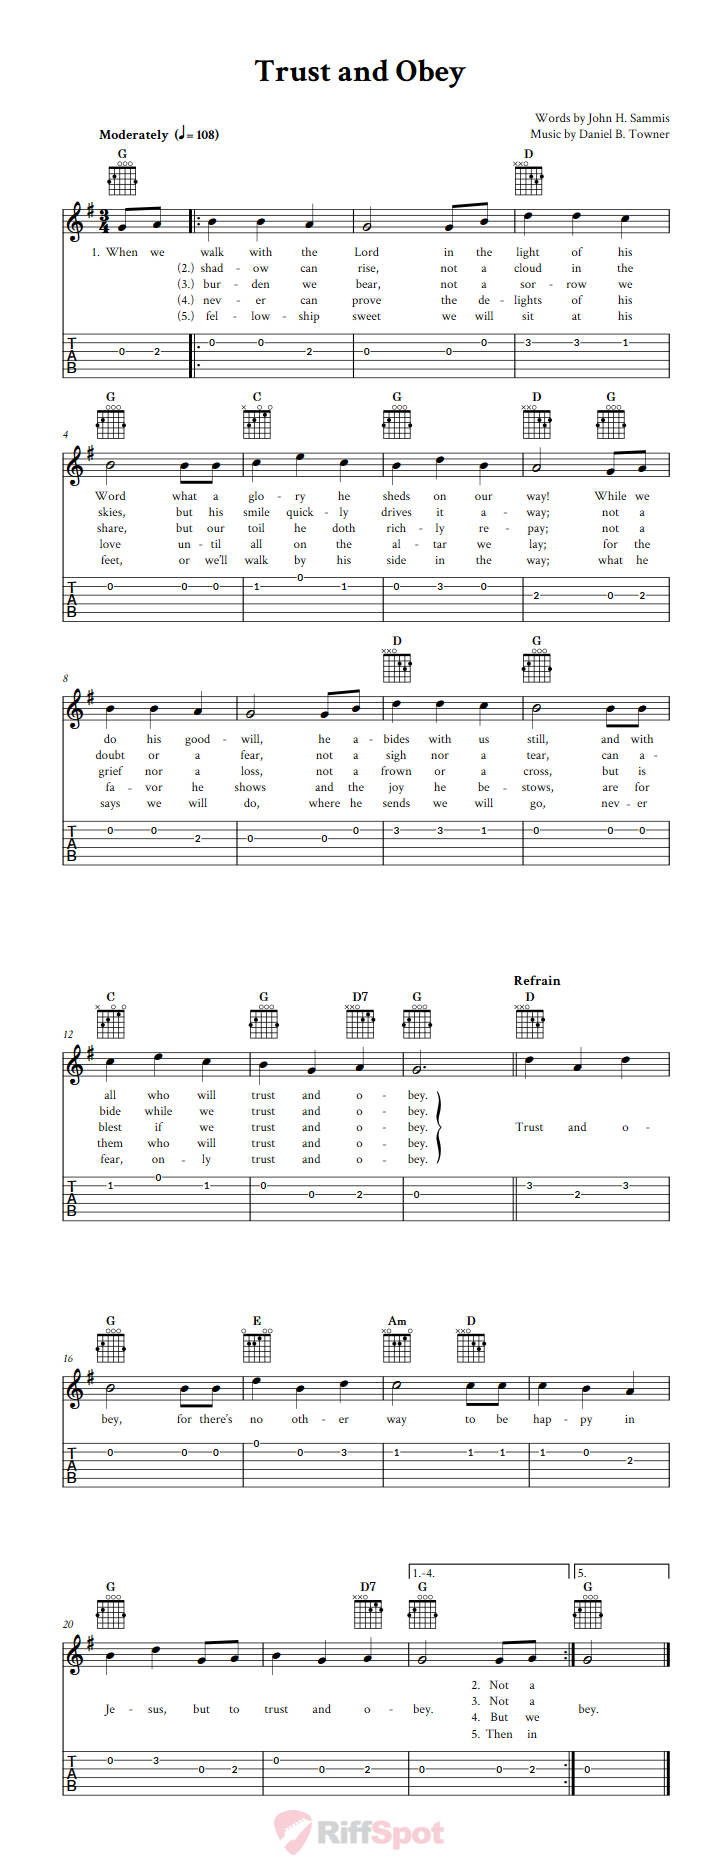 Trust and Obey Guitar Tab